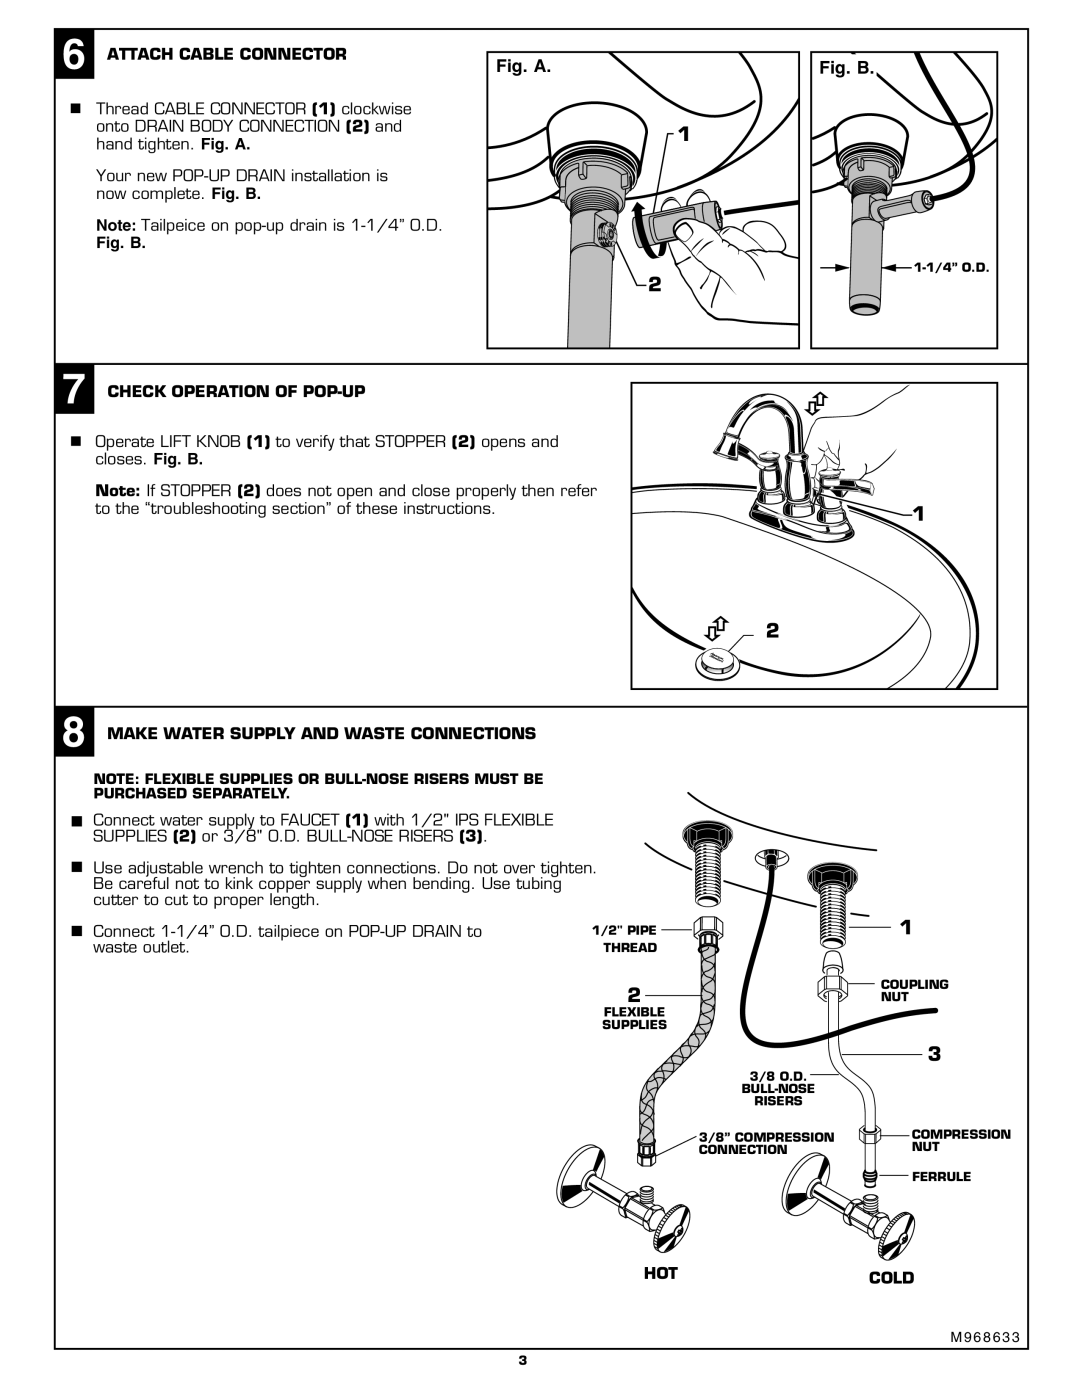 American Standard 6074.XXX Fig. A, Attach Cable Connector, Check Operation Of Pop-Up, closes. Fig. B, Hotcold 